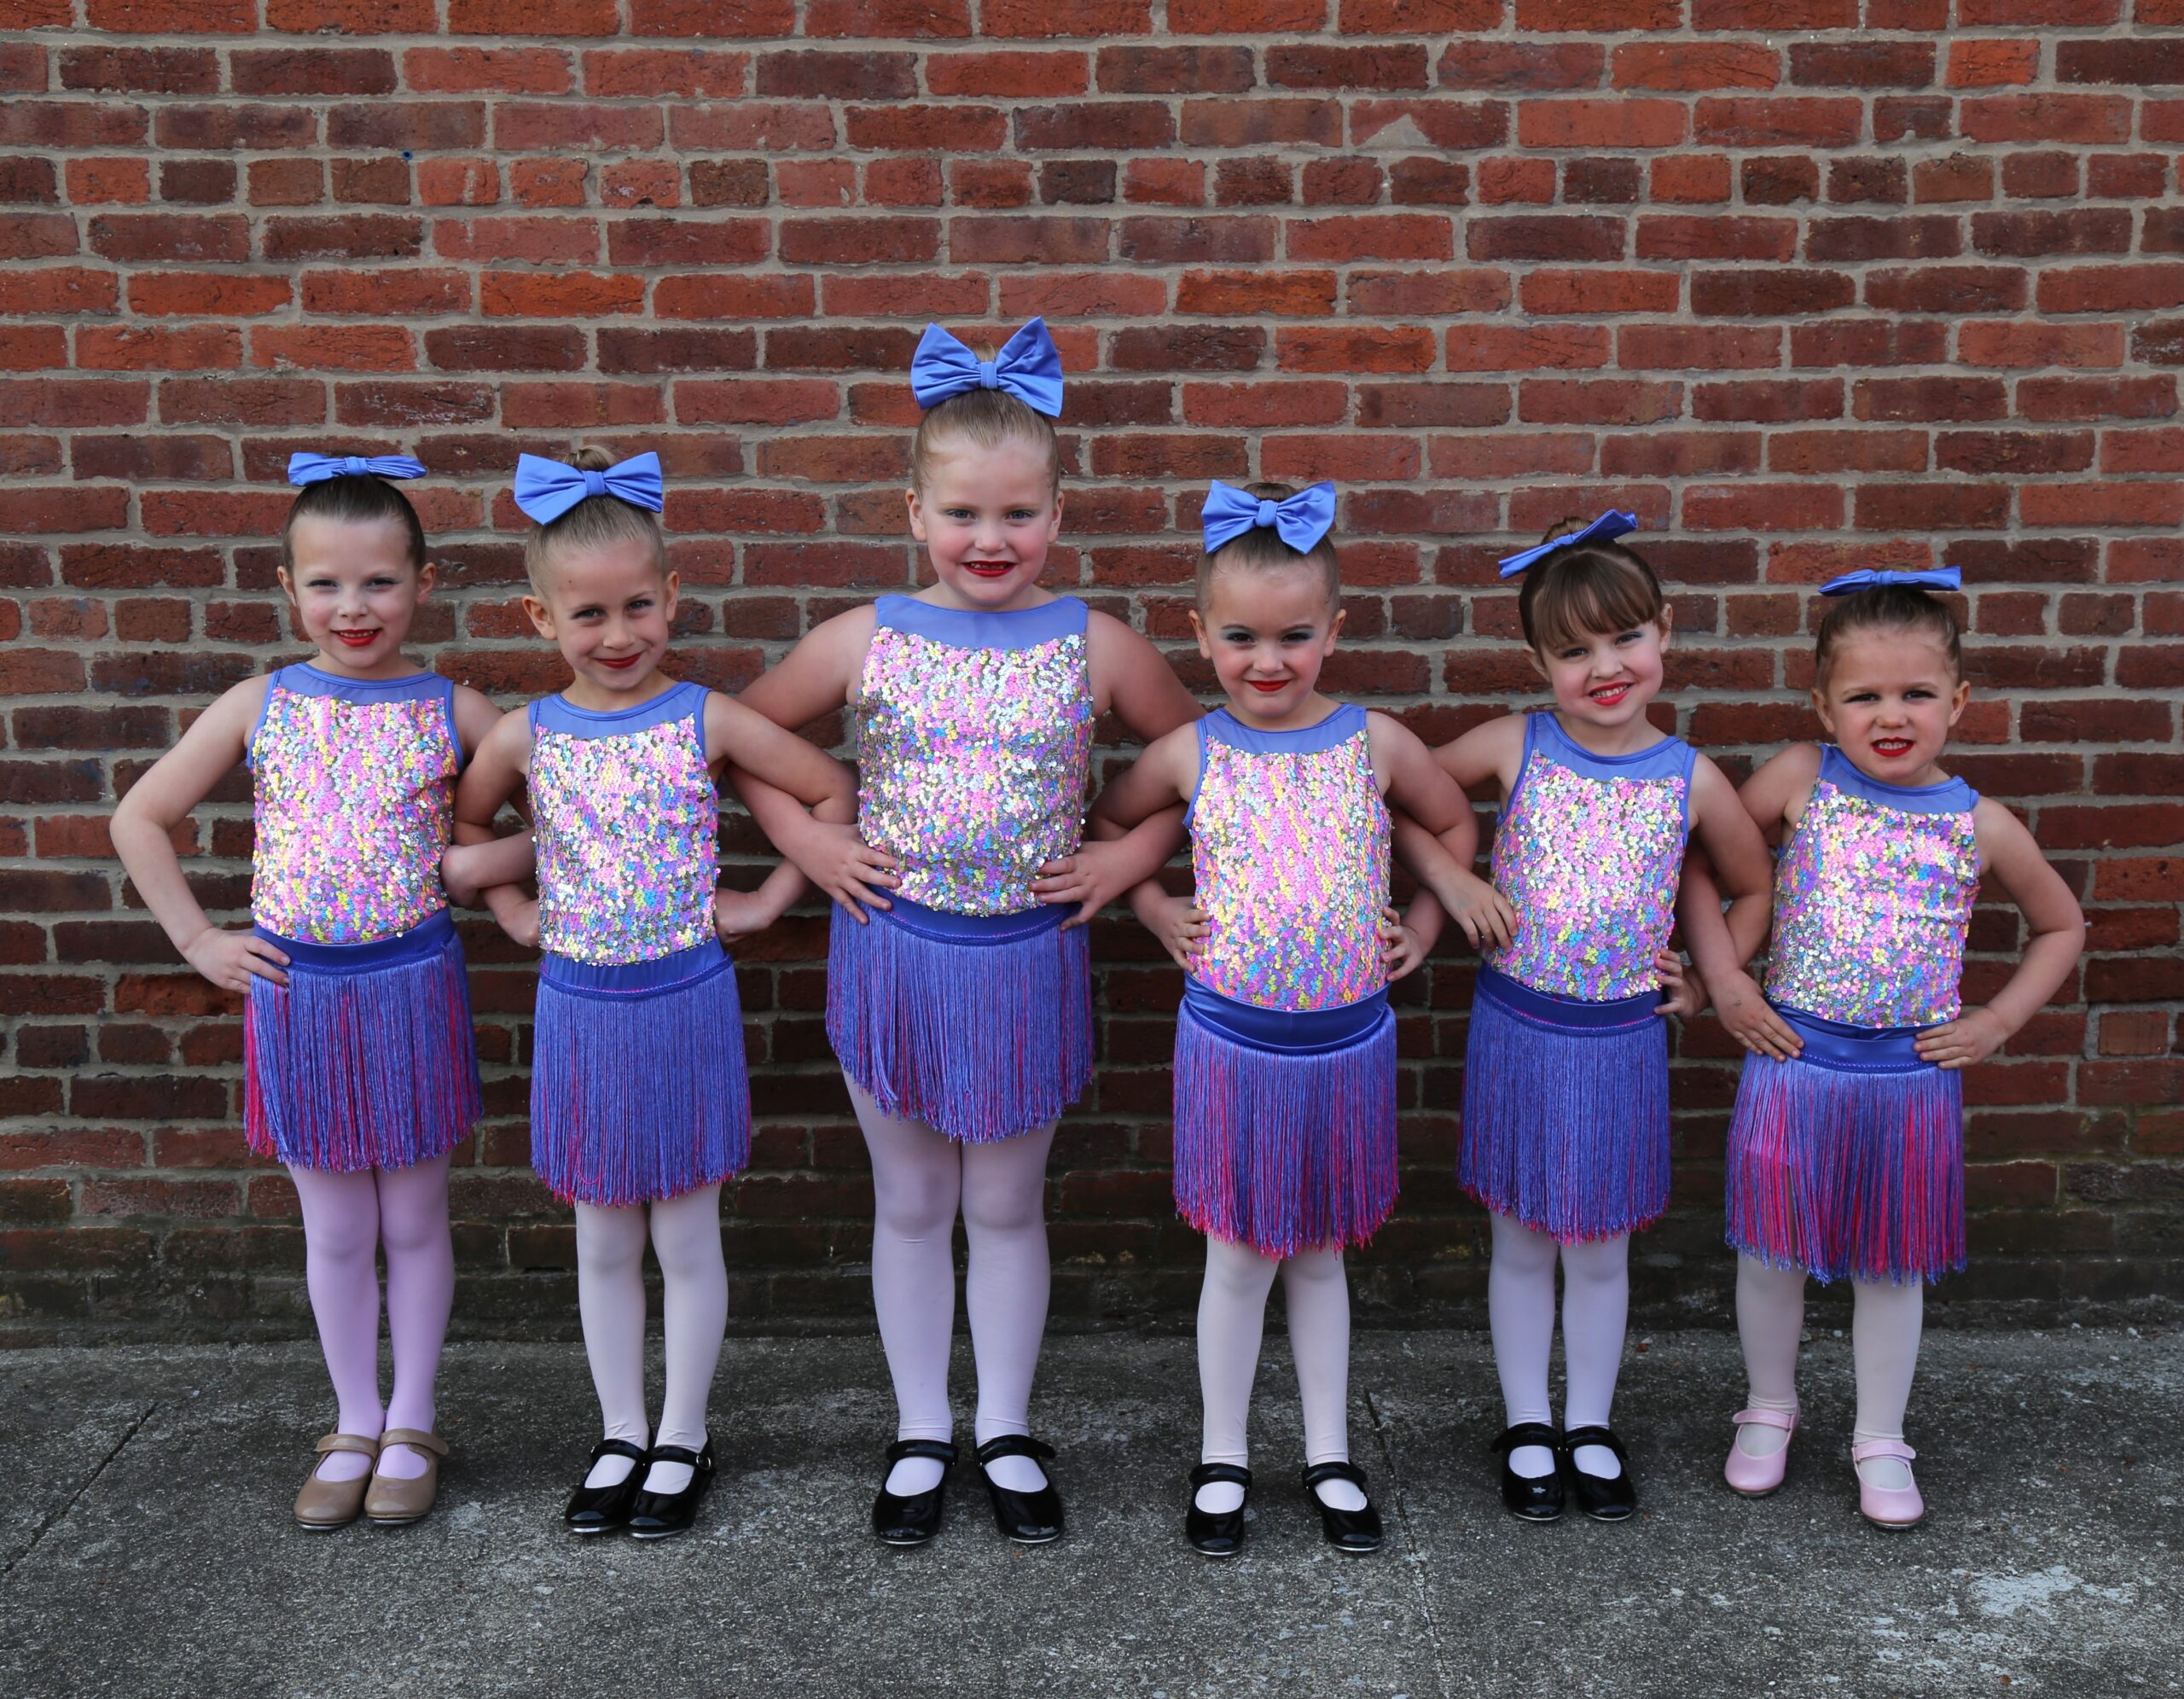 Tutus & Tap group posing in sparkly outfits against a brick wall